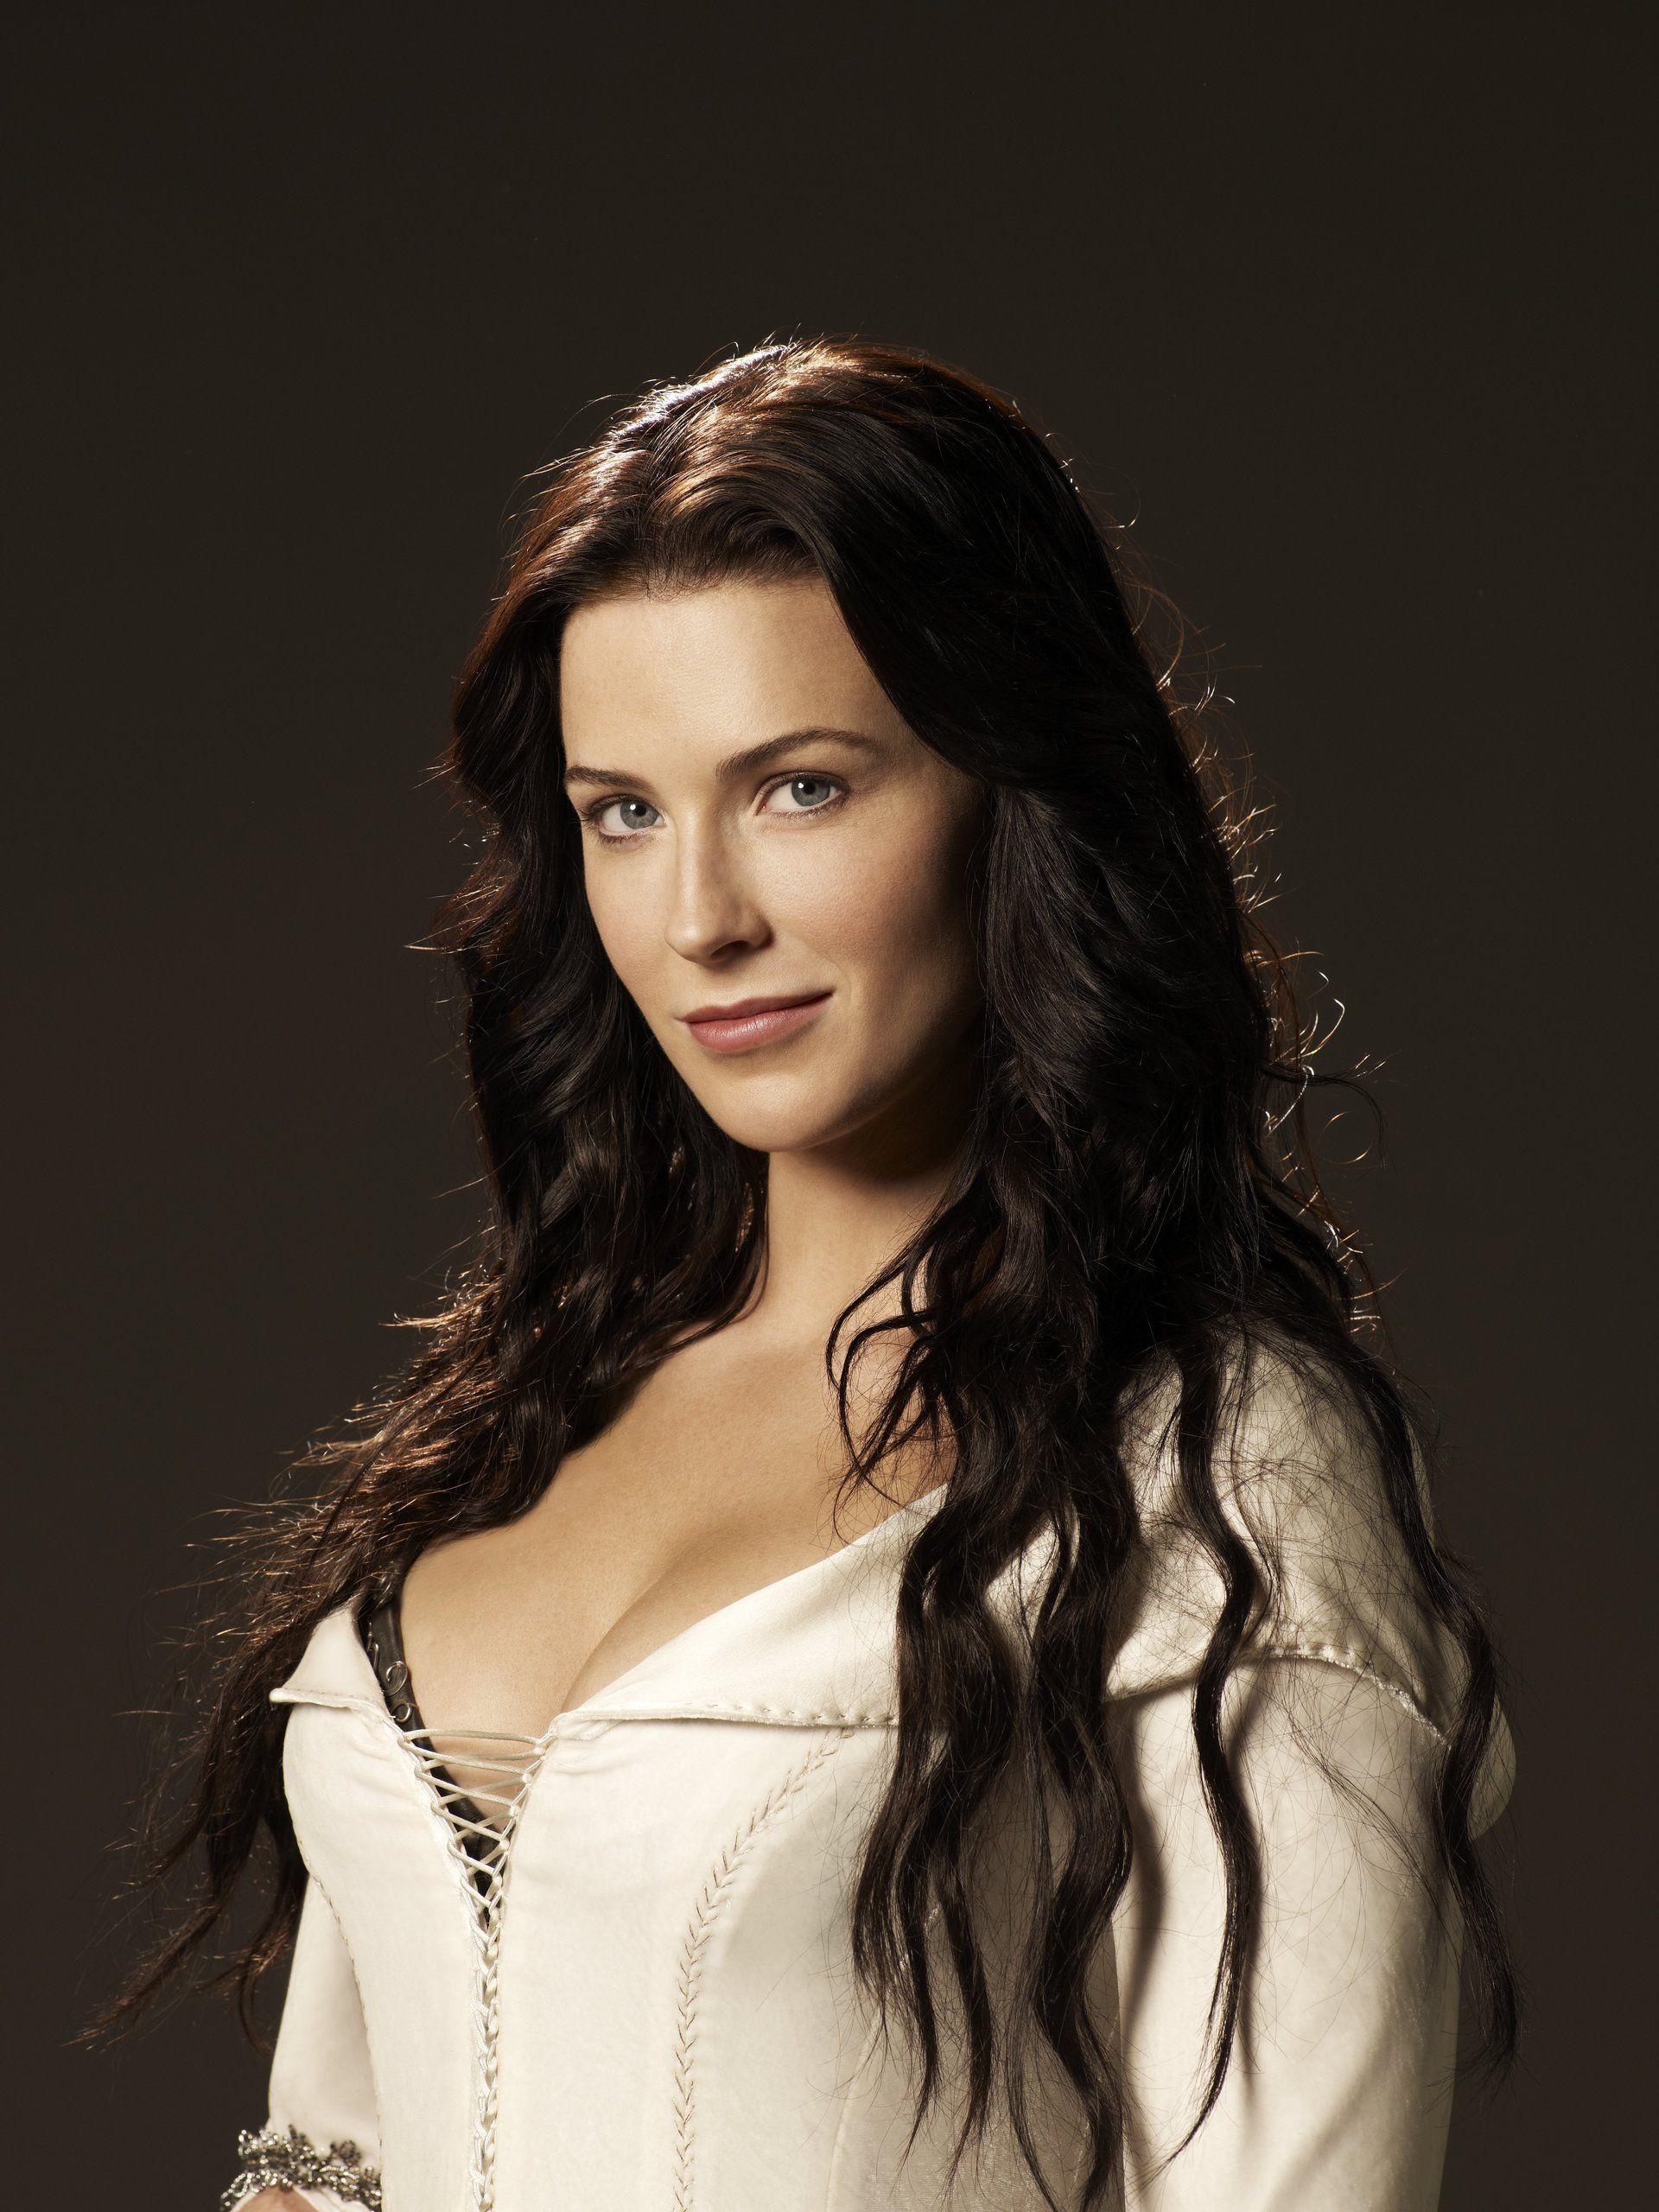 51 Hottest Bridget Regan Big Butt Pictures Will Drive You Wildly Enchanted With This Dashing Damsel 209